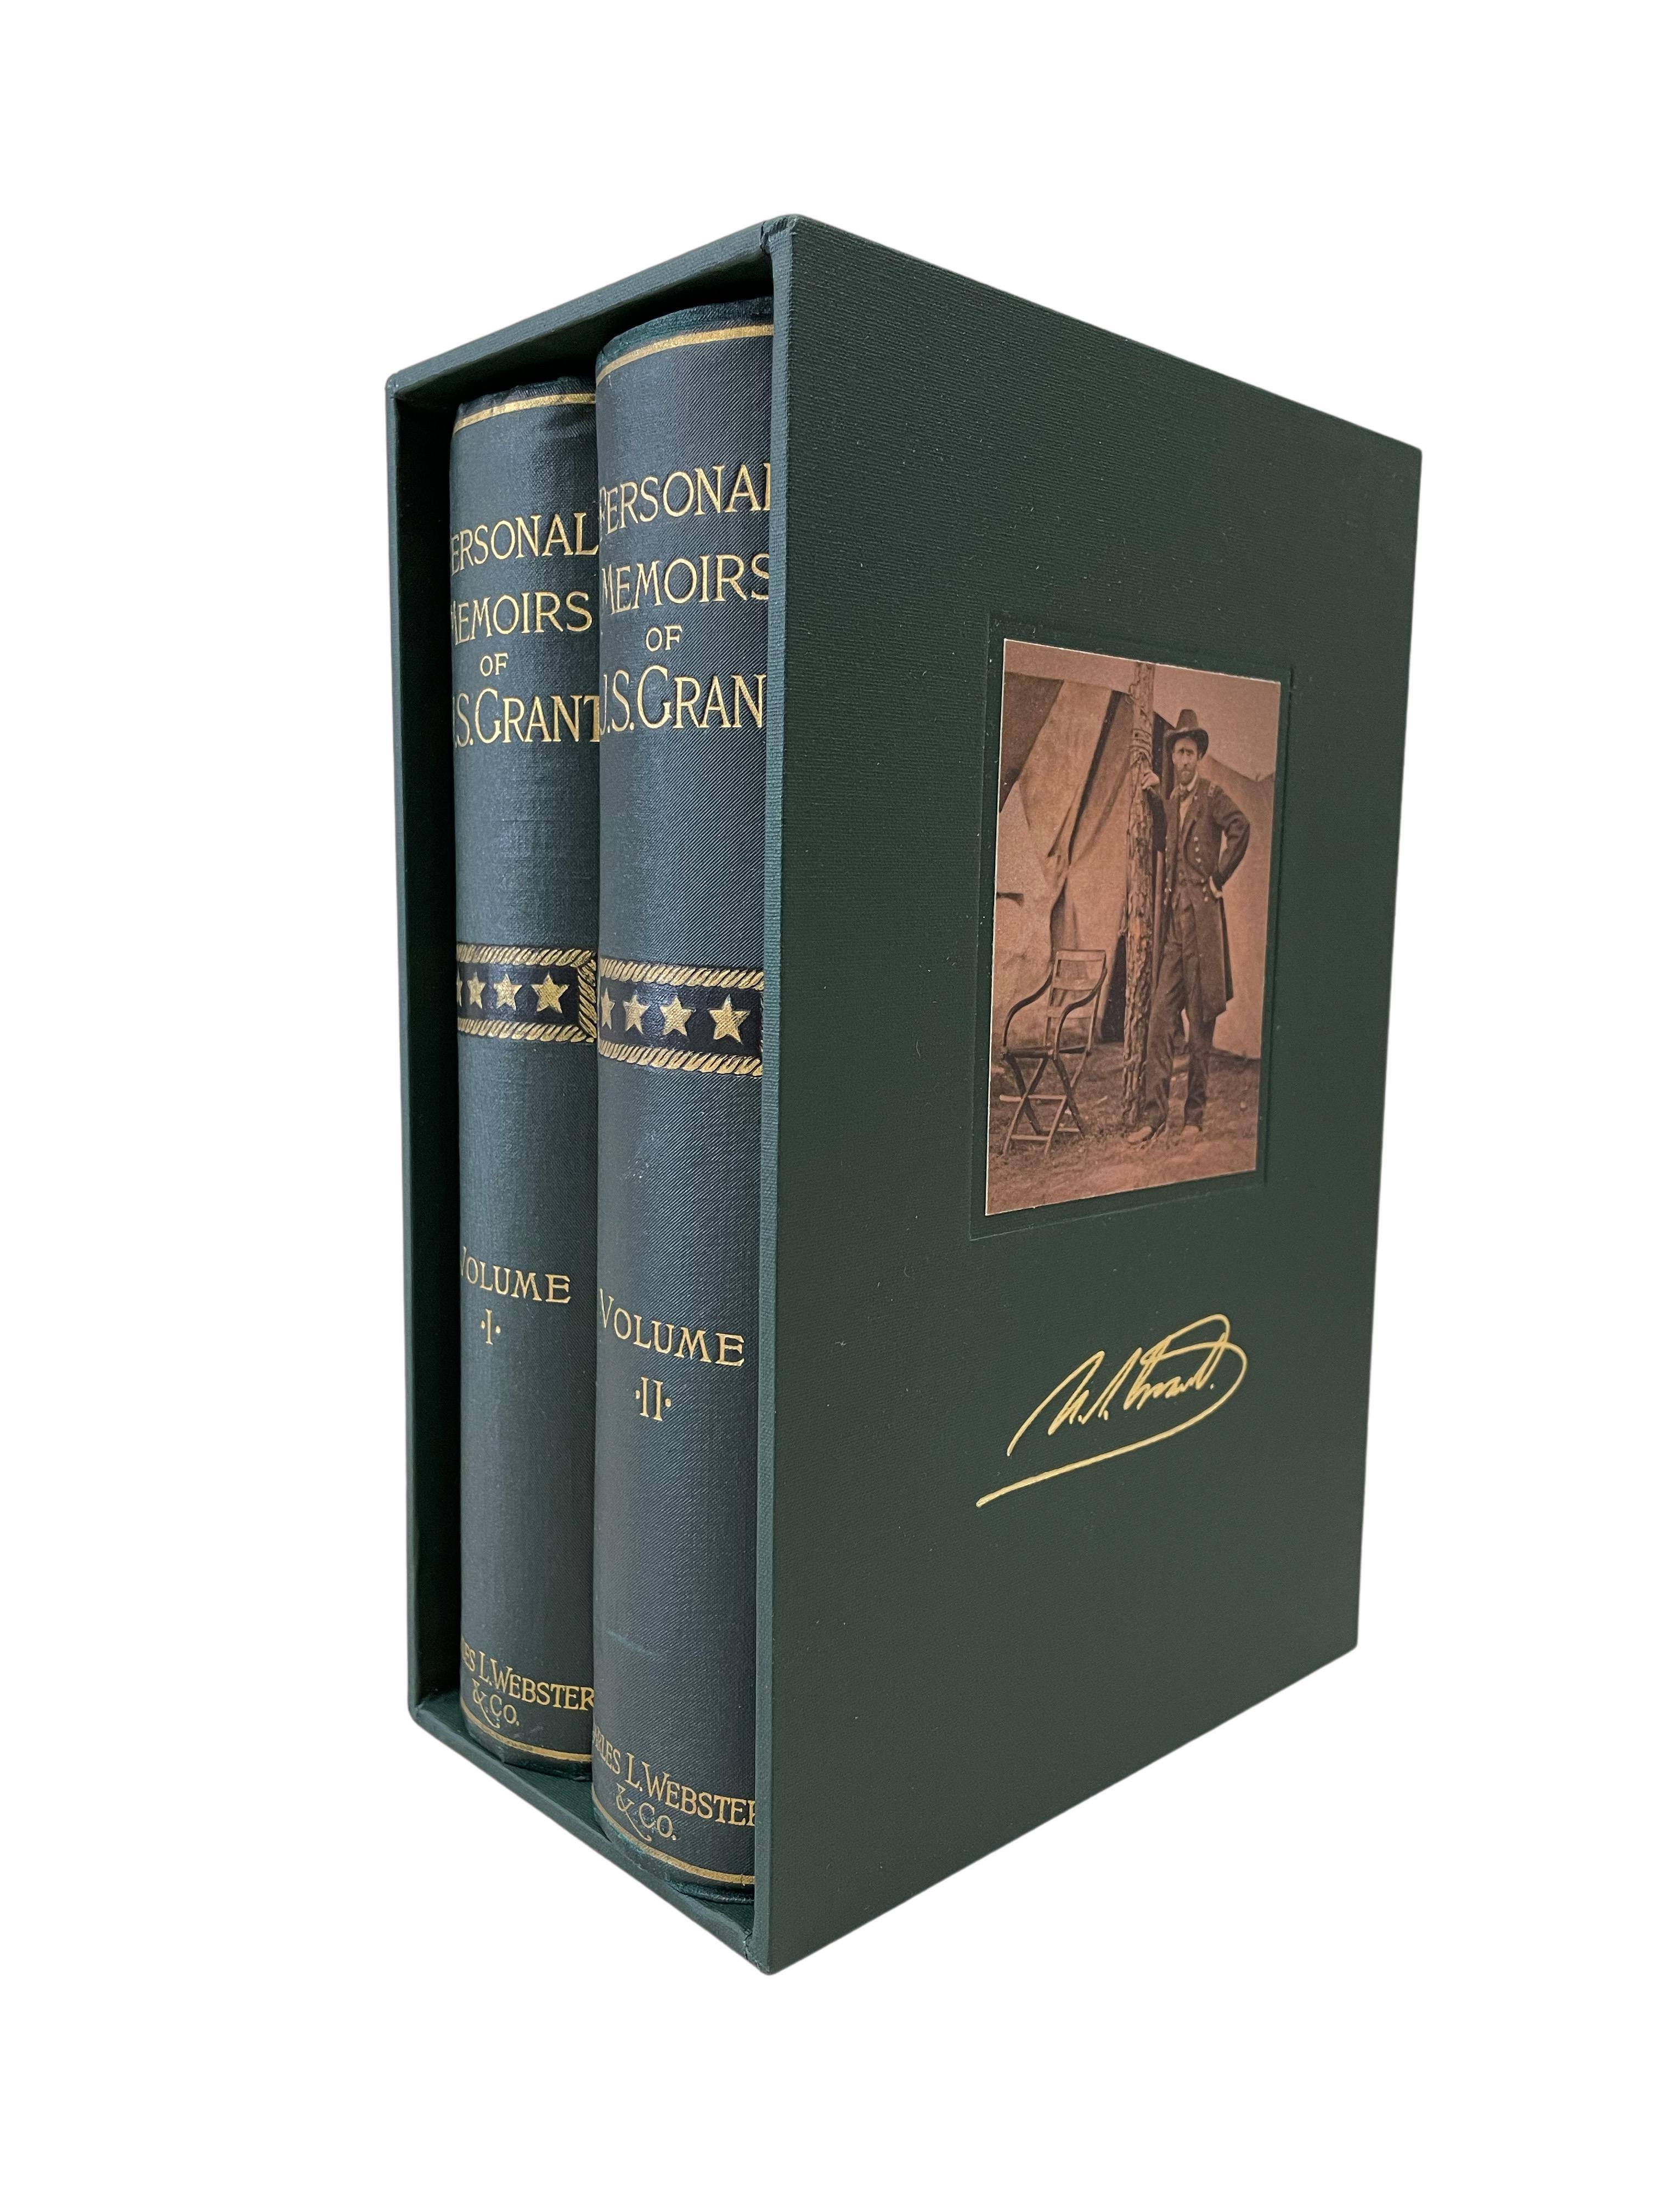 Grant, Ulysses S. Personal Memoirs of U.S. Grant. New York: Charles L. Webster and Co., 1892. Second edition. Two volume set. Octavo, period green cloth bindings, with new joints and a new archival slipcase.
This second edition, two-volume set of